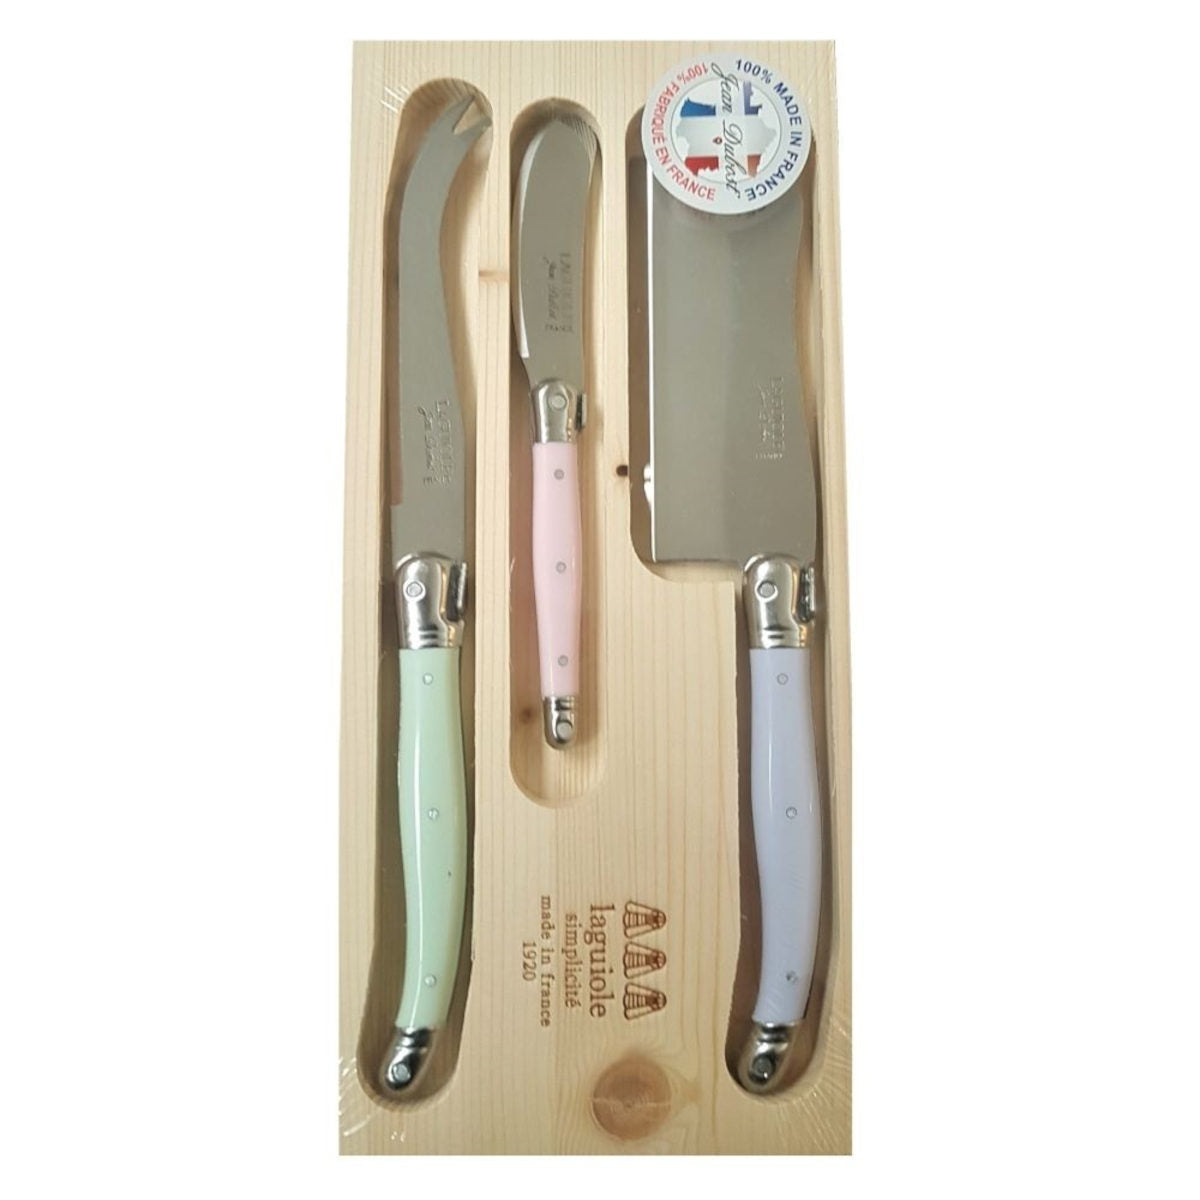 Laguiole Jean Dubost Simplicite Cheese Knife Set with Cleaver 3 Piece